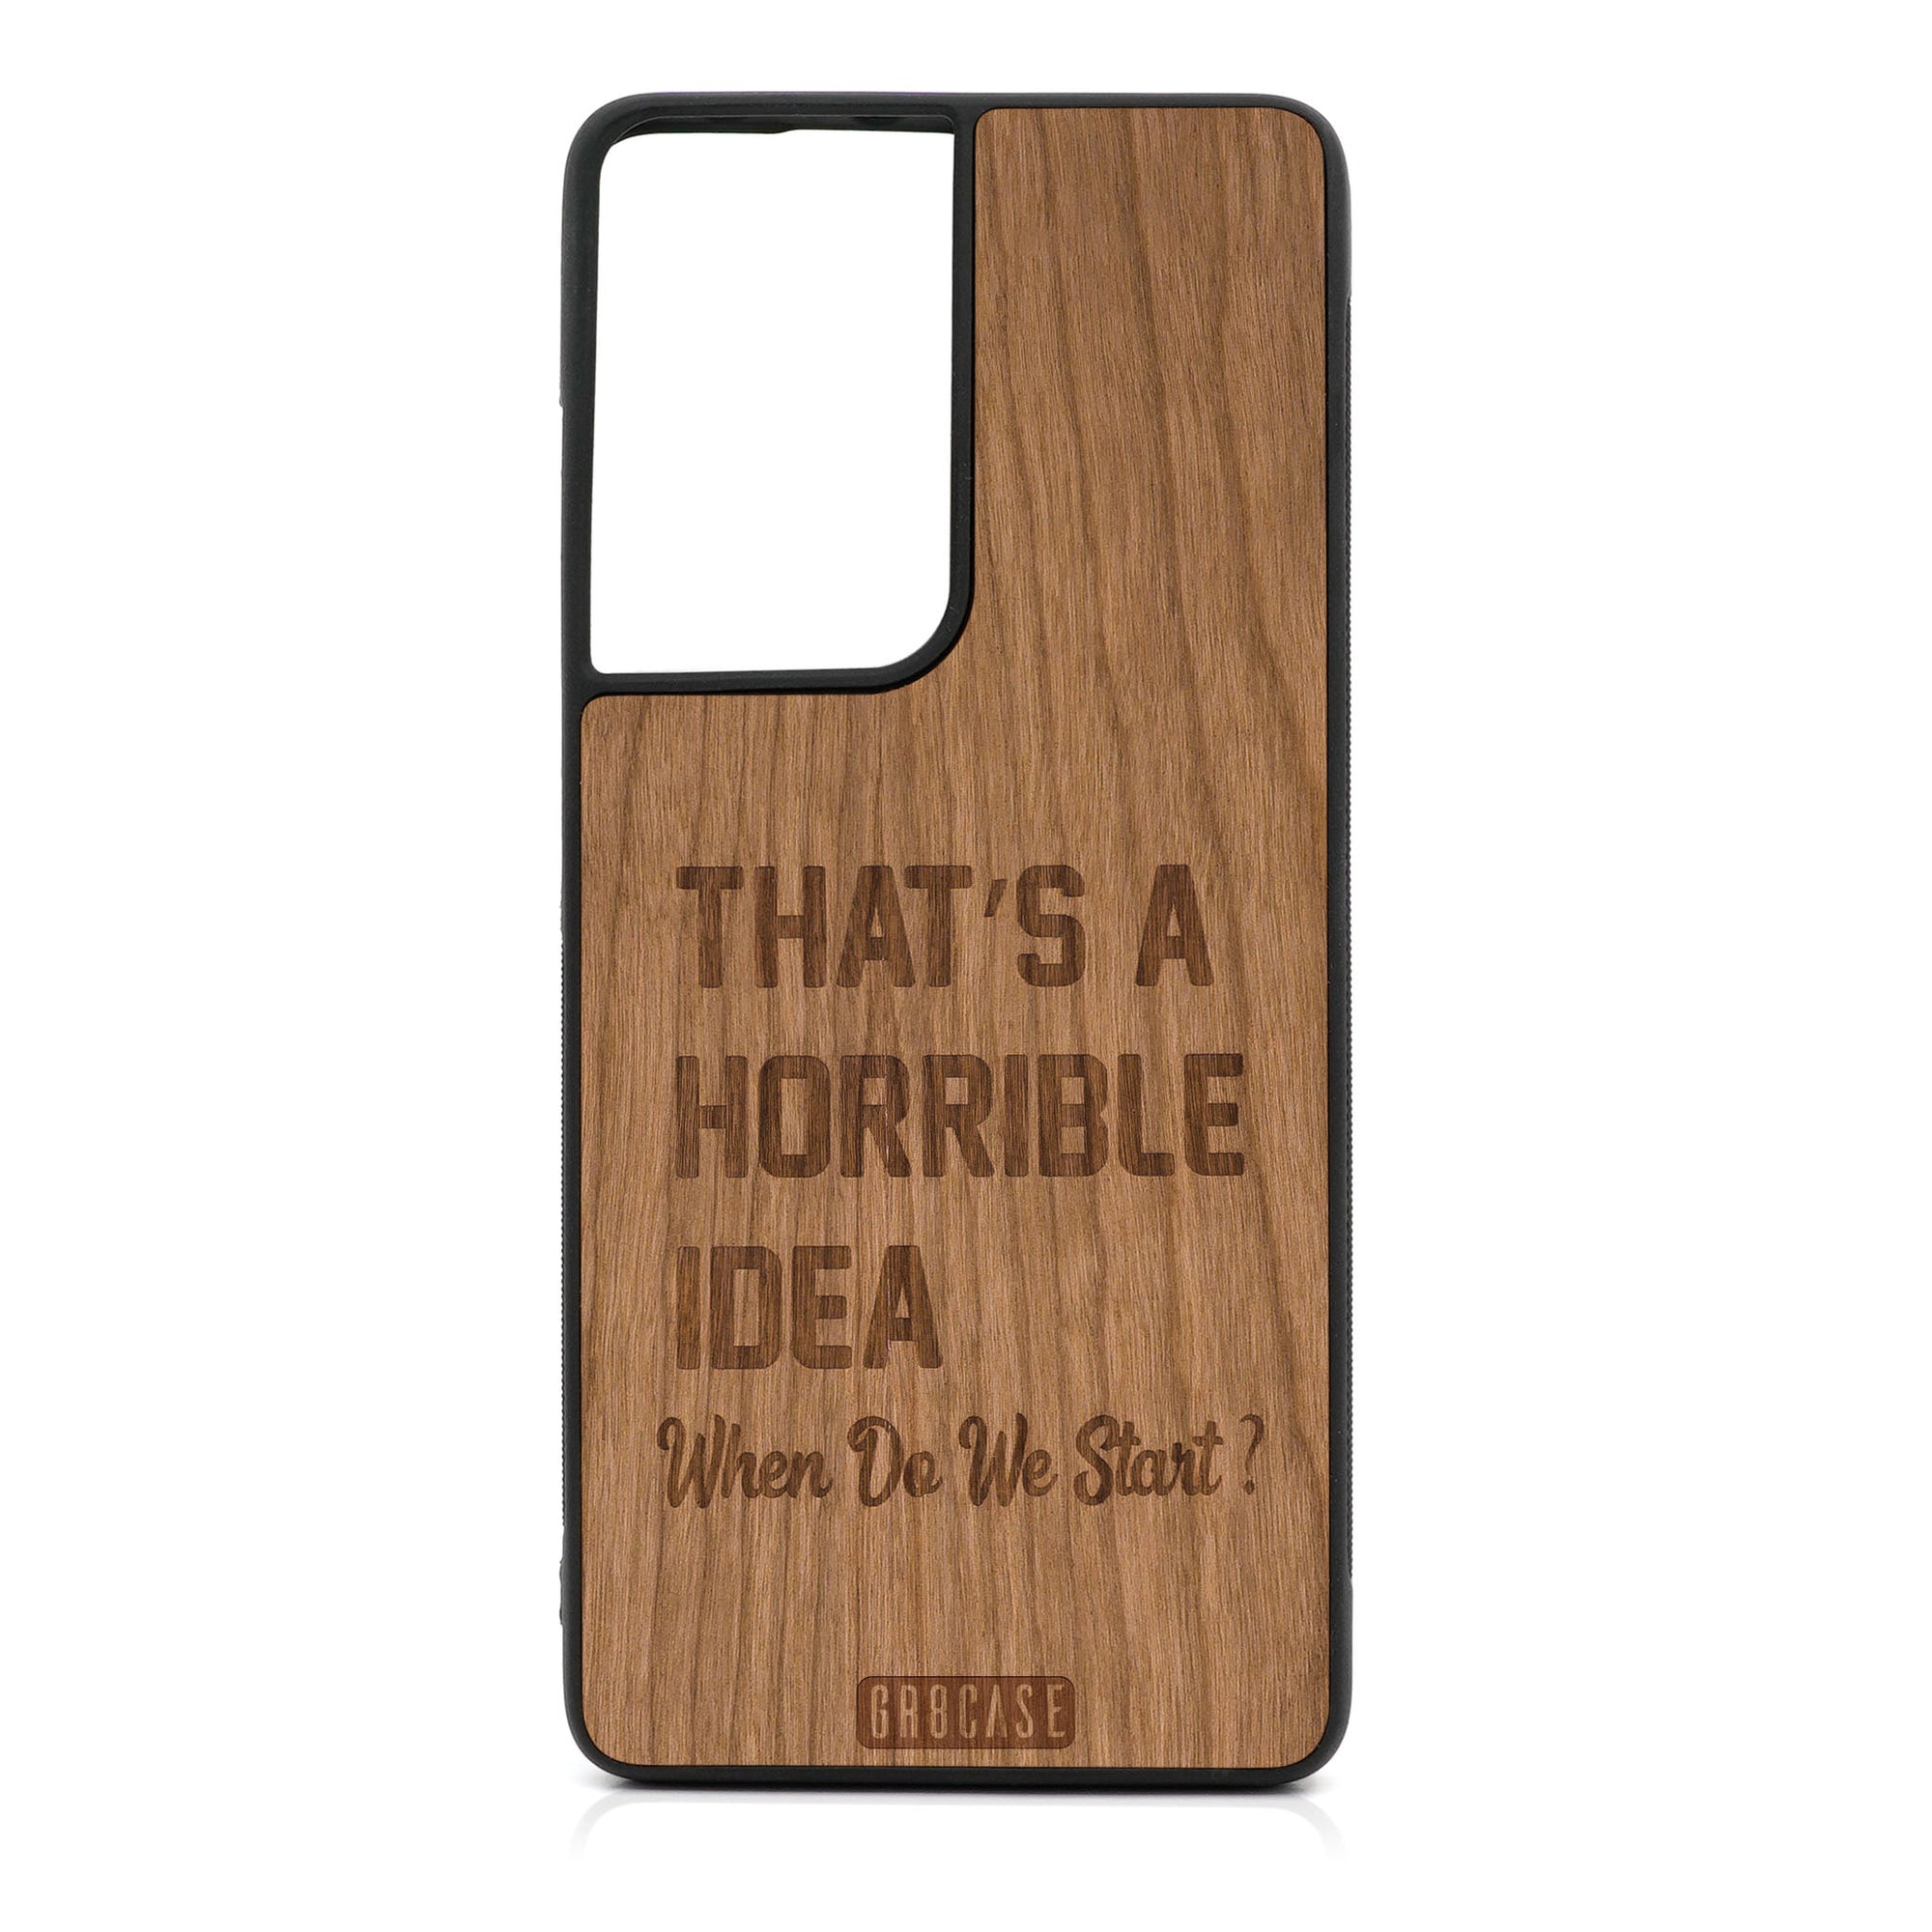 That's A Horrible Idea When Do We Start? Design Wood Case For Samsung Galaxy S21 Ultra 5G